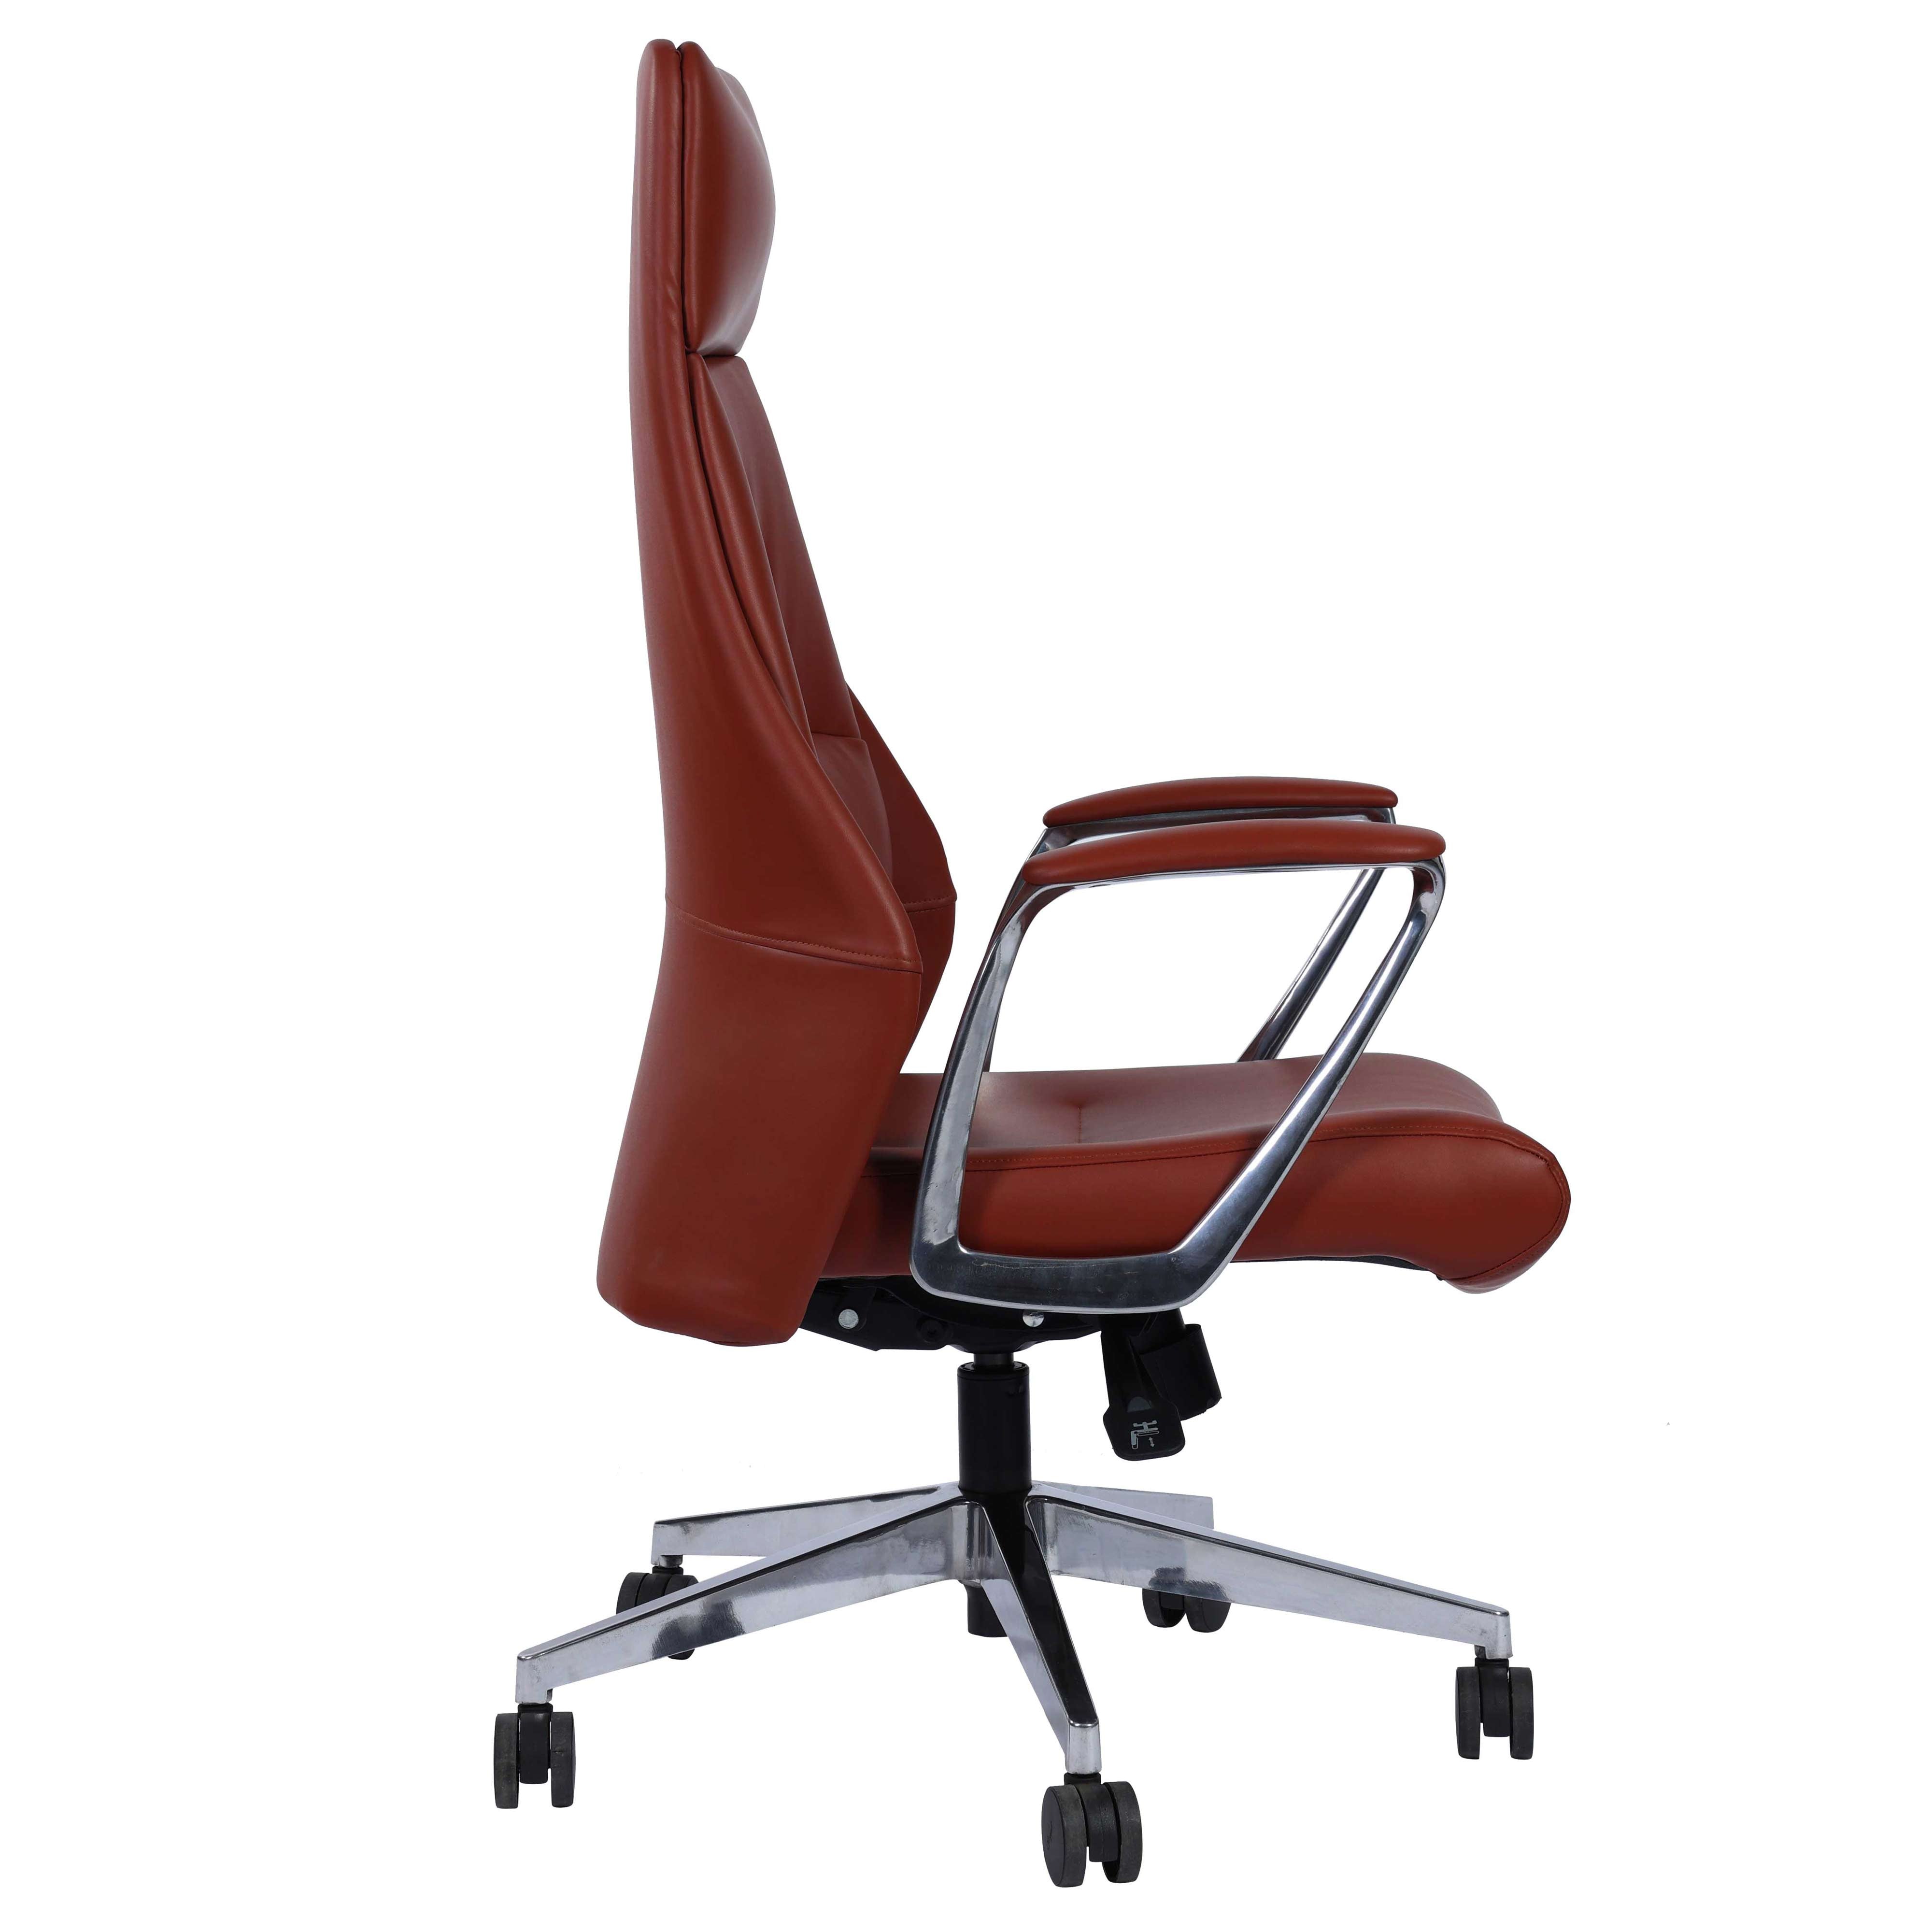 Augusto Executive Boss Chair PVC Leather Upholstered with Aluminium Base - Red